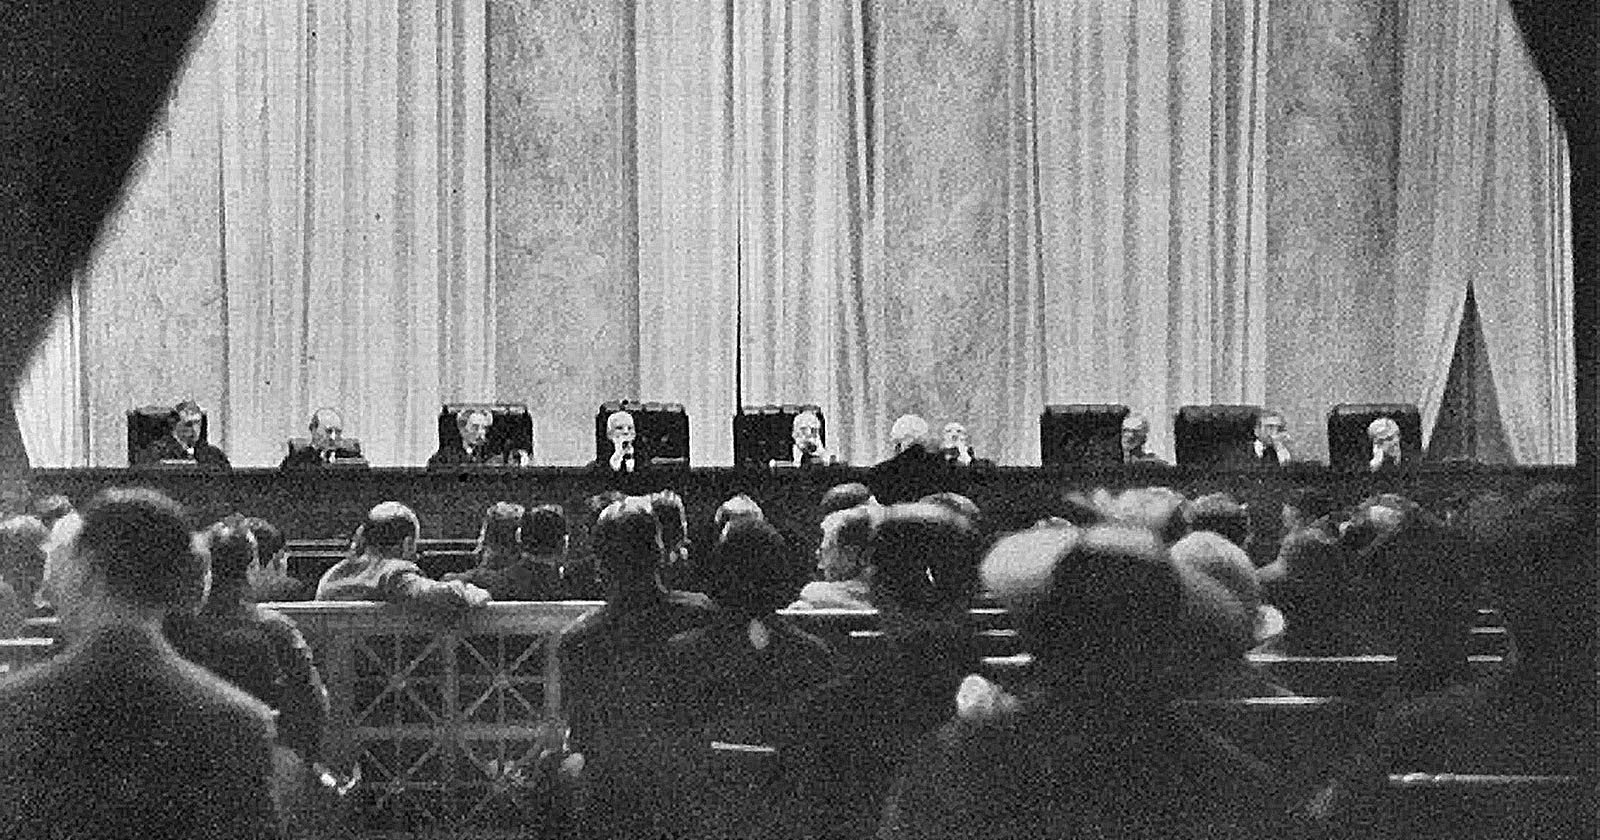 These Are The Only Two Photos Of The Us Supreme Court In Session